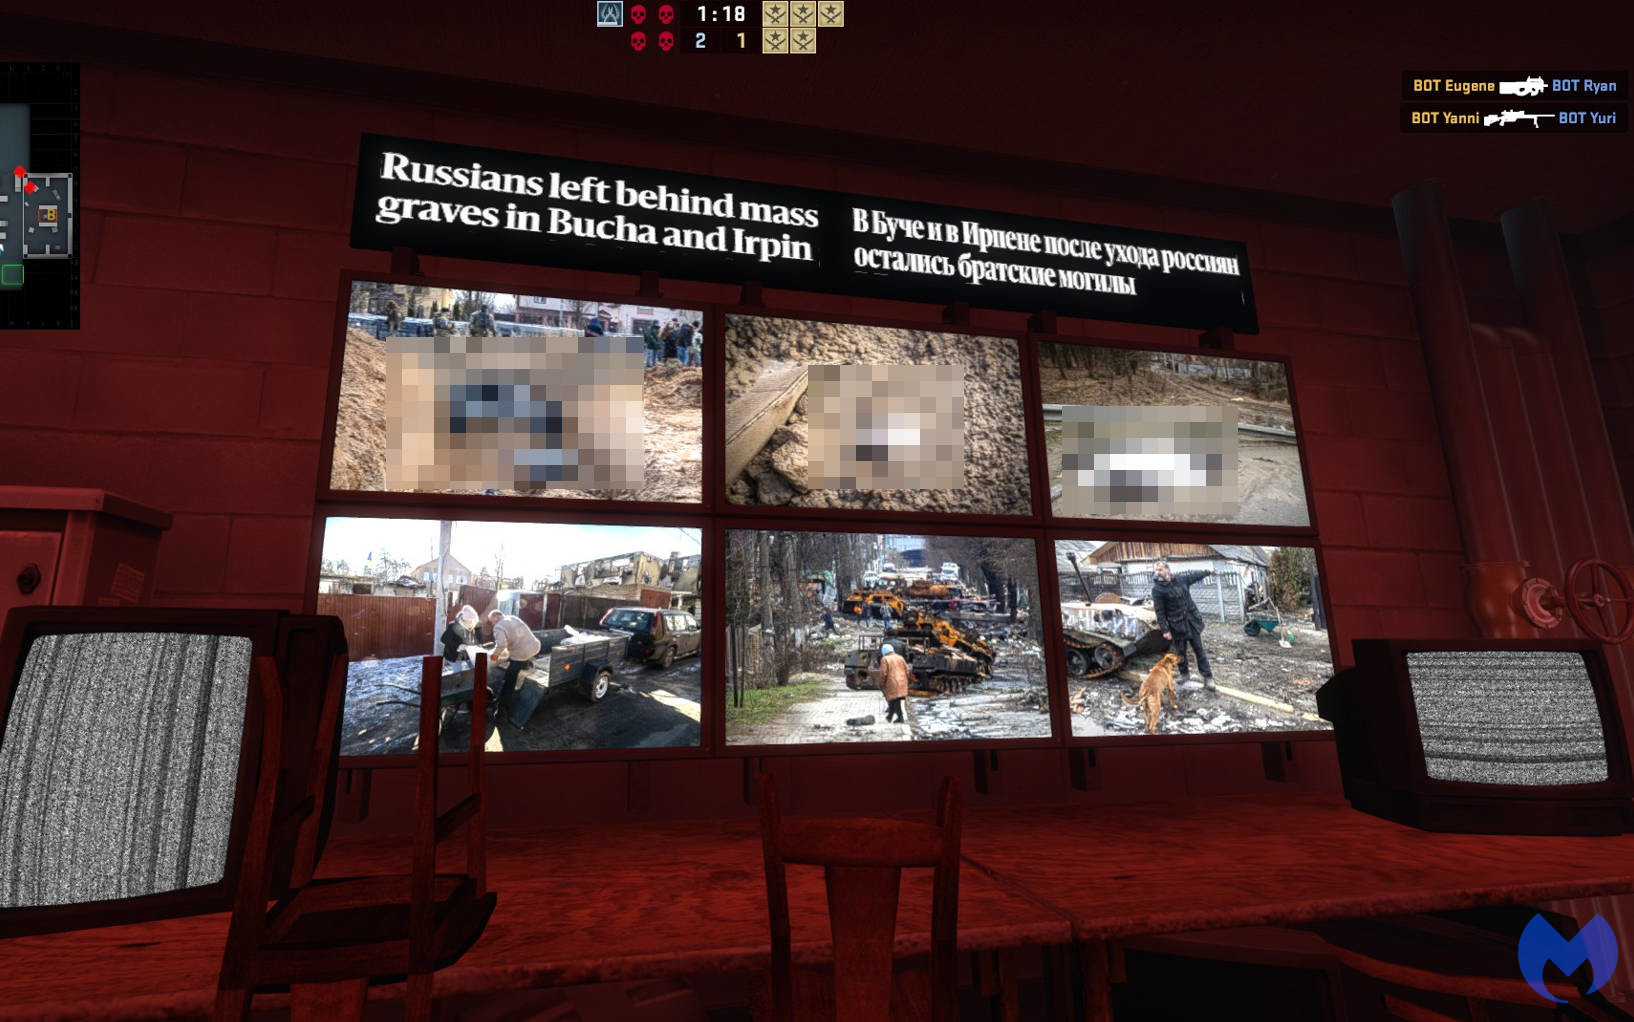 Screens show images off mass graves in Bucha and Irpin